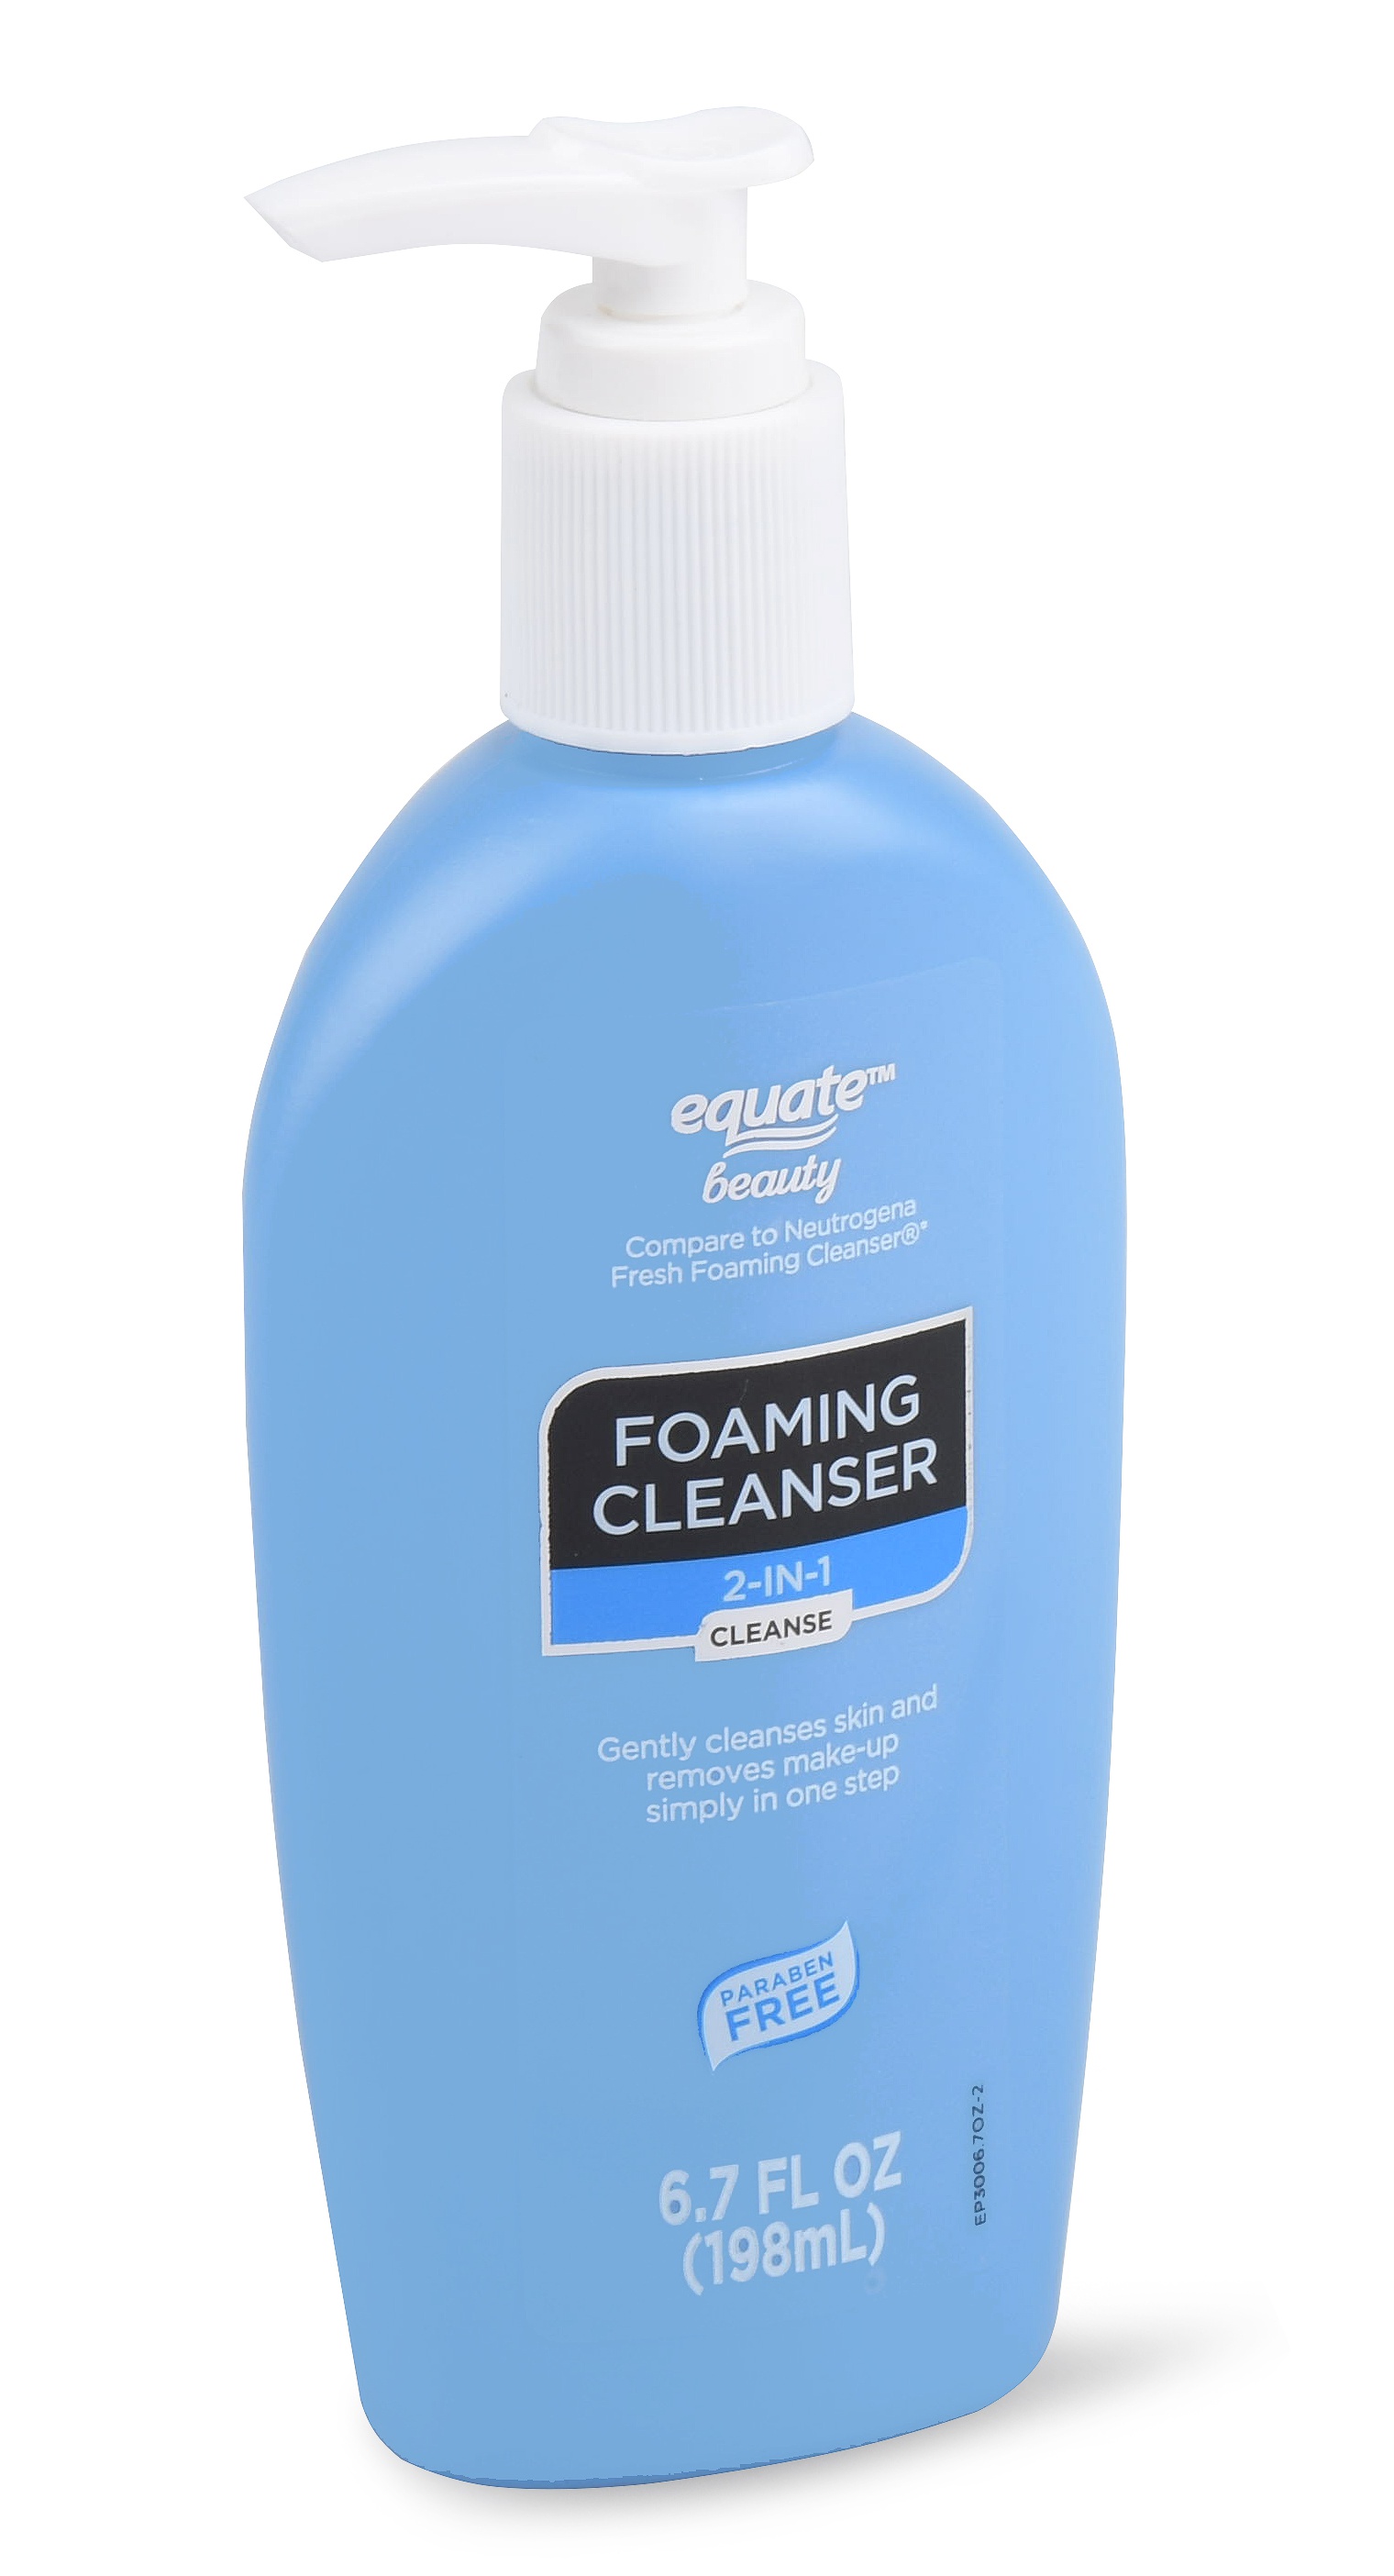 Equate Foaming Cleanser 2-In-1 Cleanse